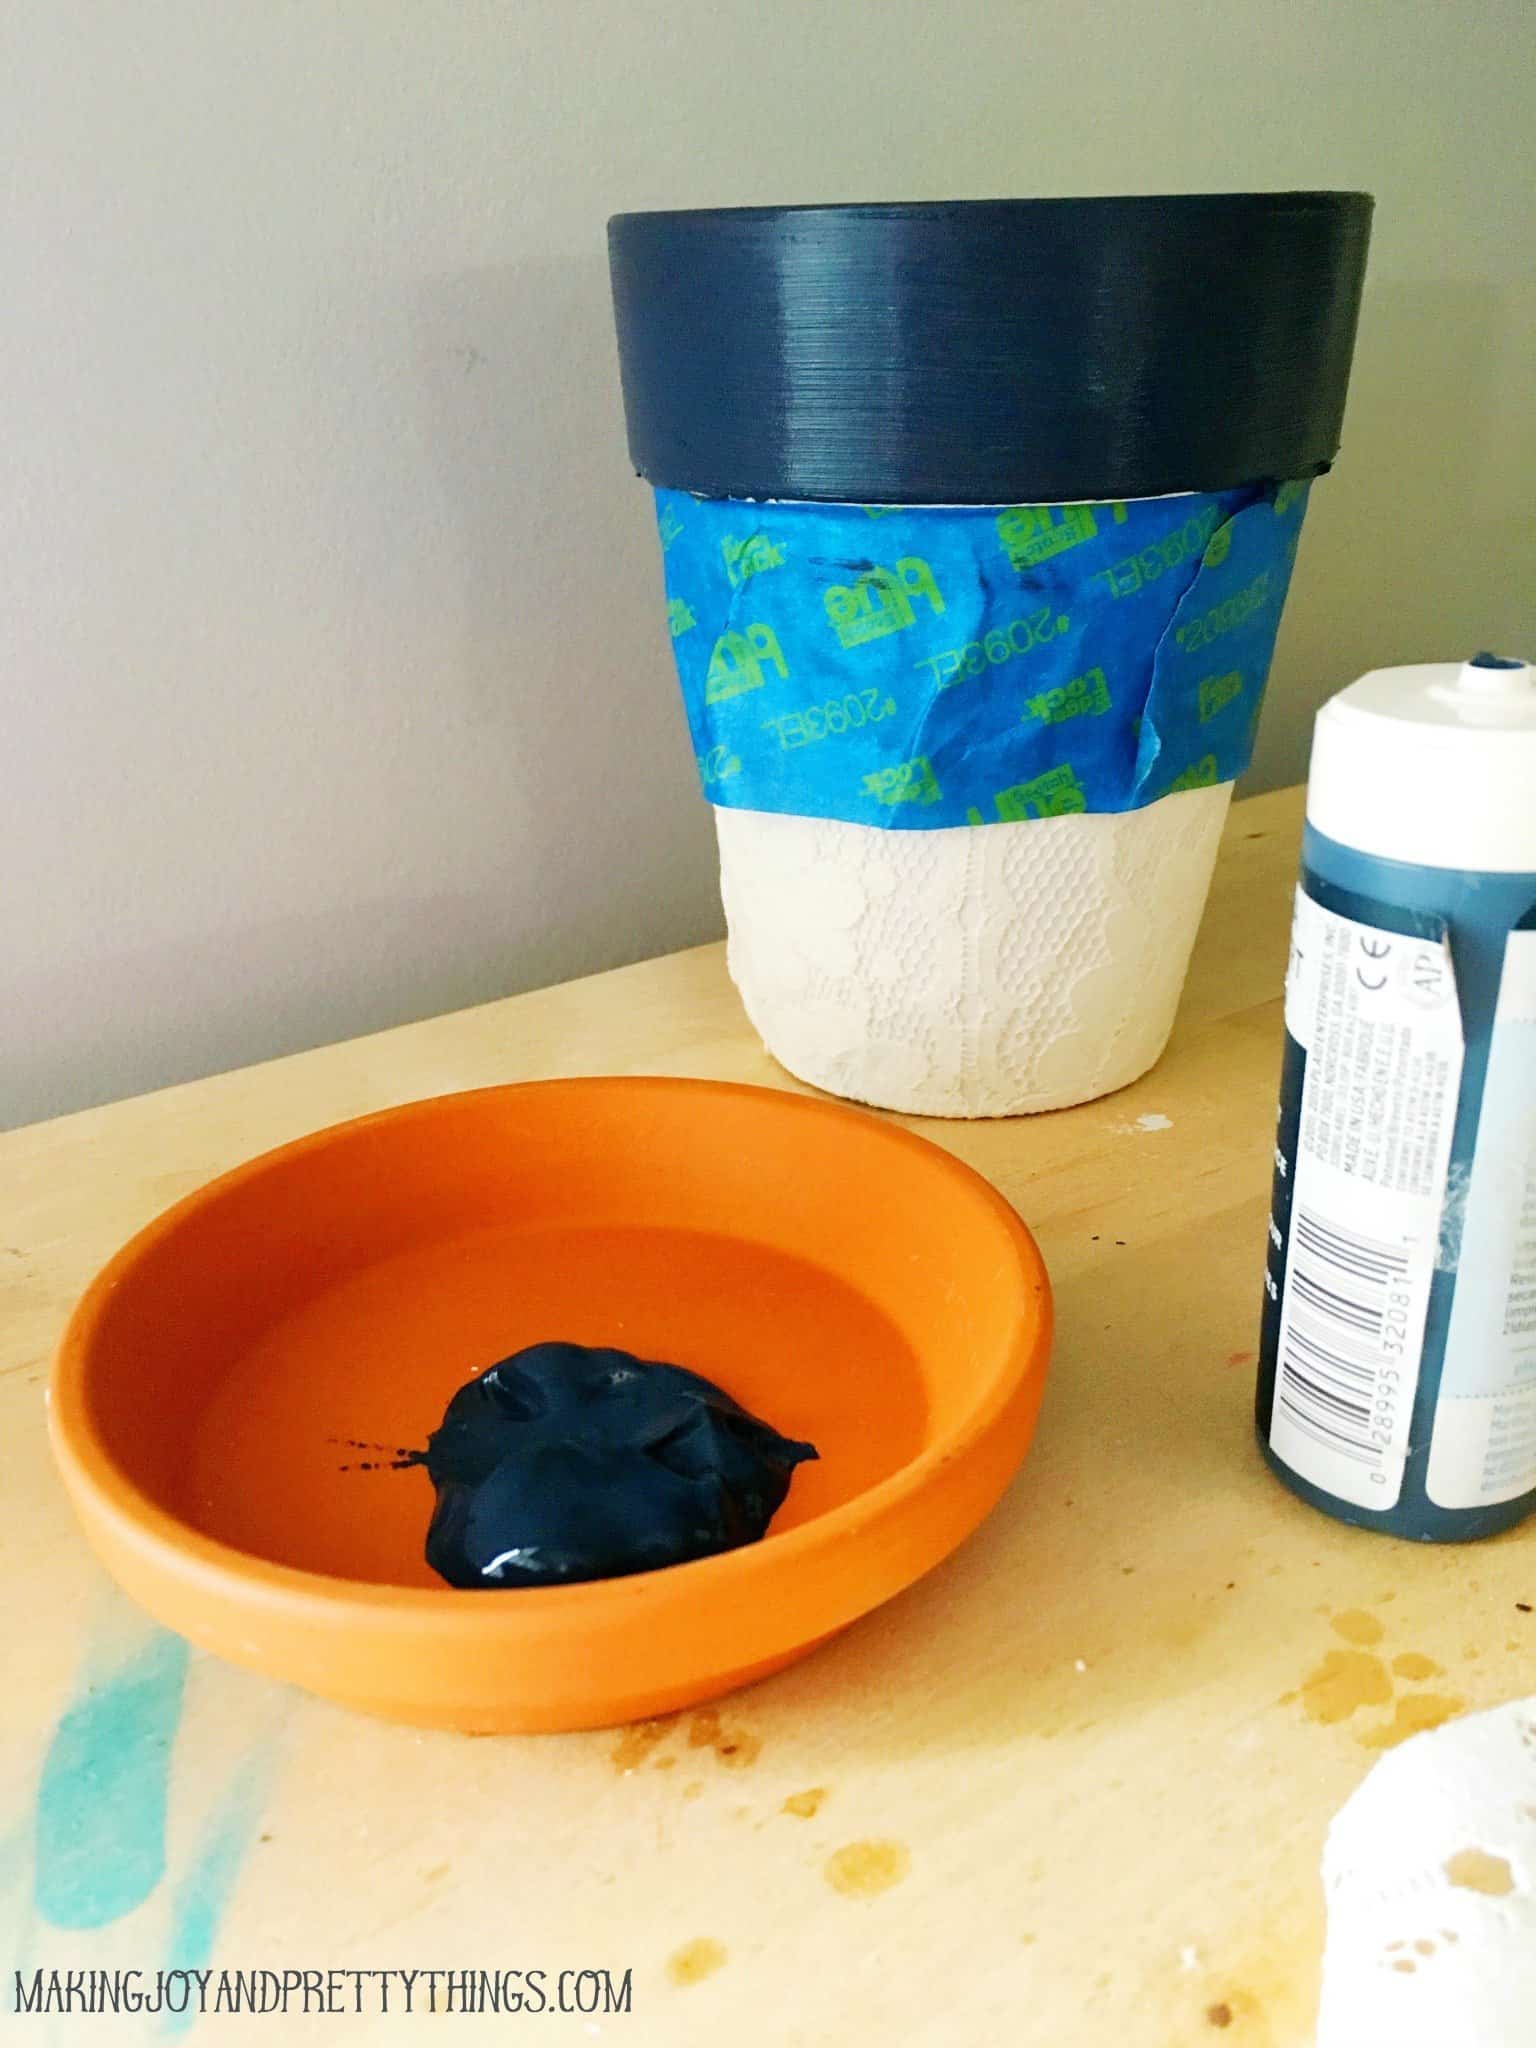 The process of painting a lace covered terra cotta pot. In the background, the pot's rim has been painted a navy blue color, and painter's tape covers the lace body. In the foreground, the terra cotta saucer is being painted with the same dark blue craft paint.